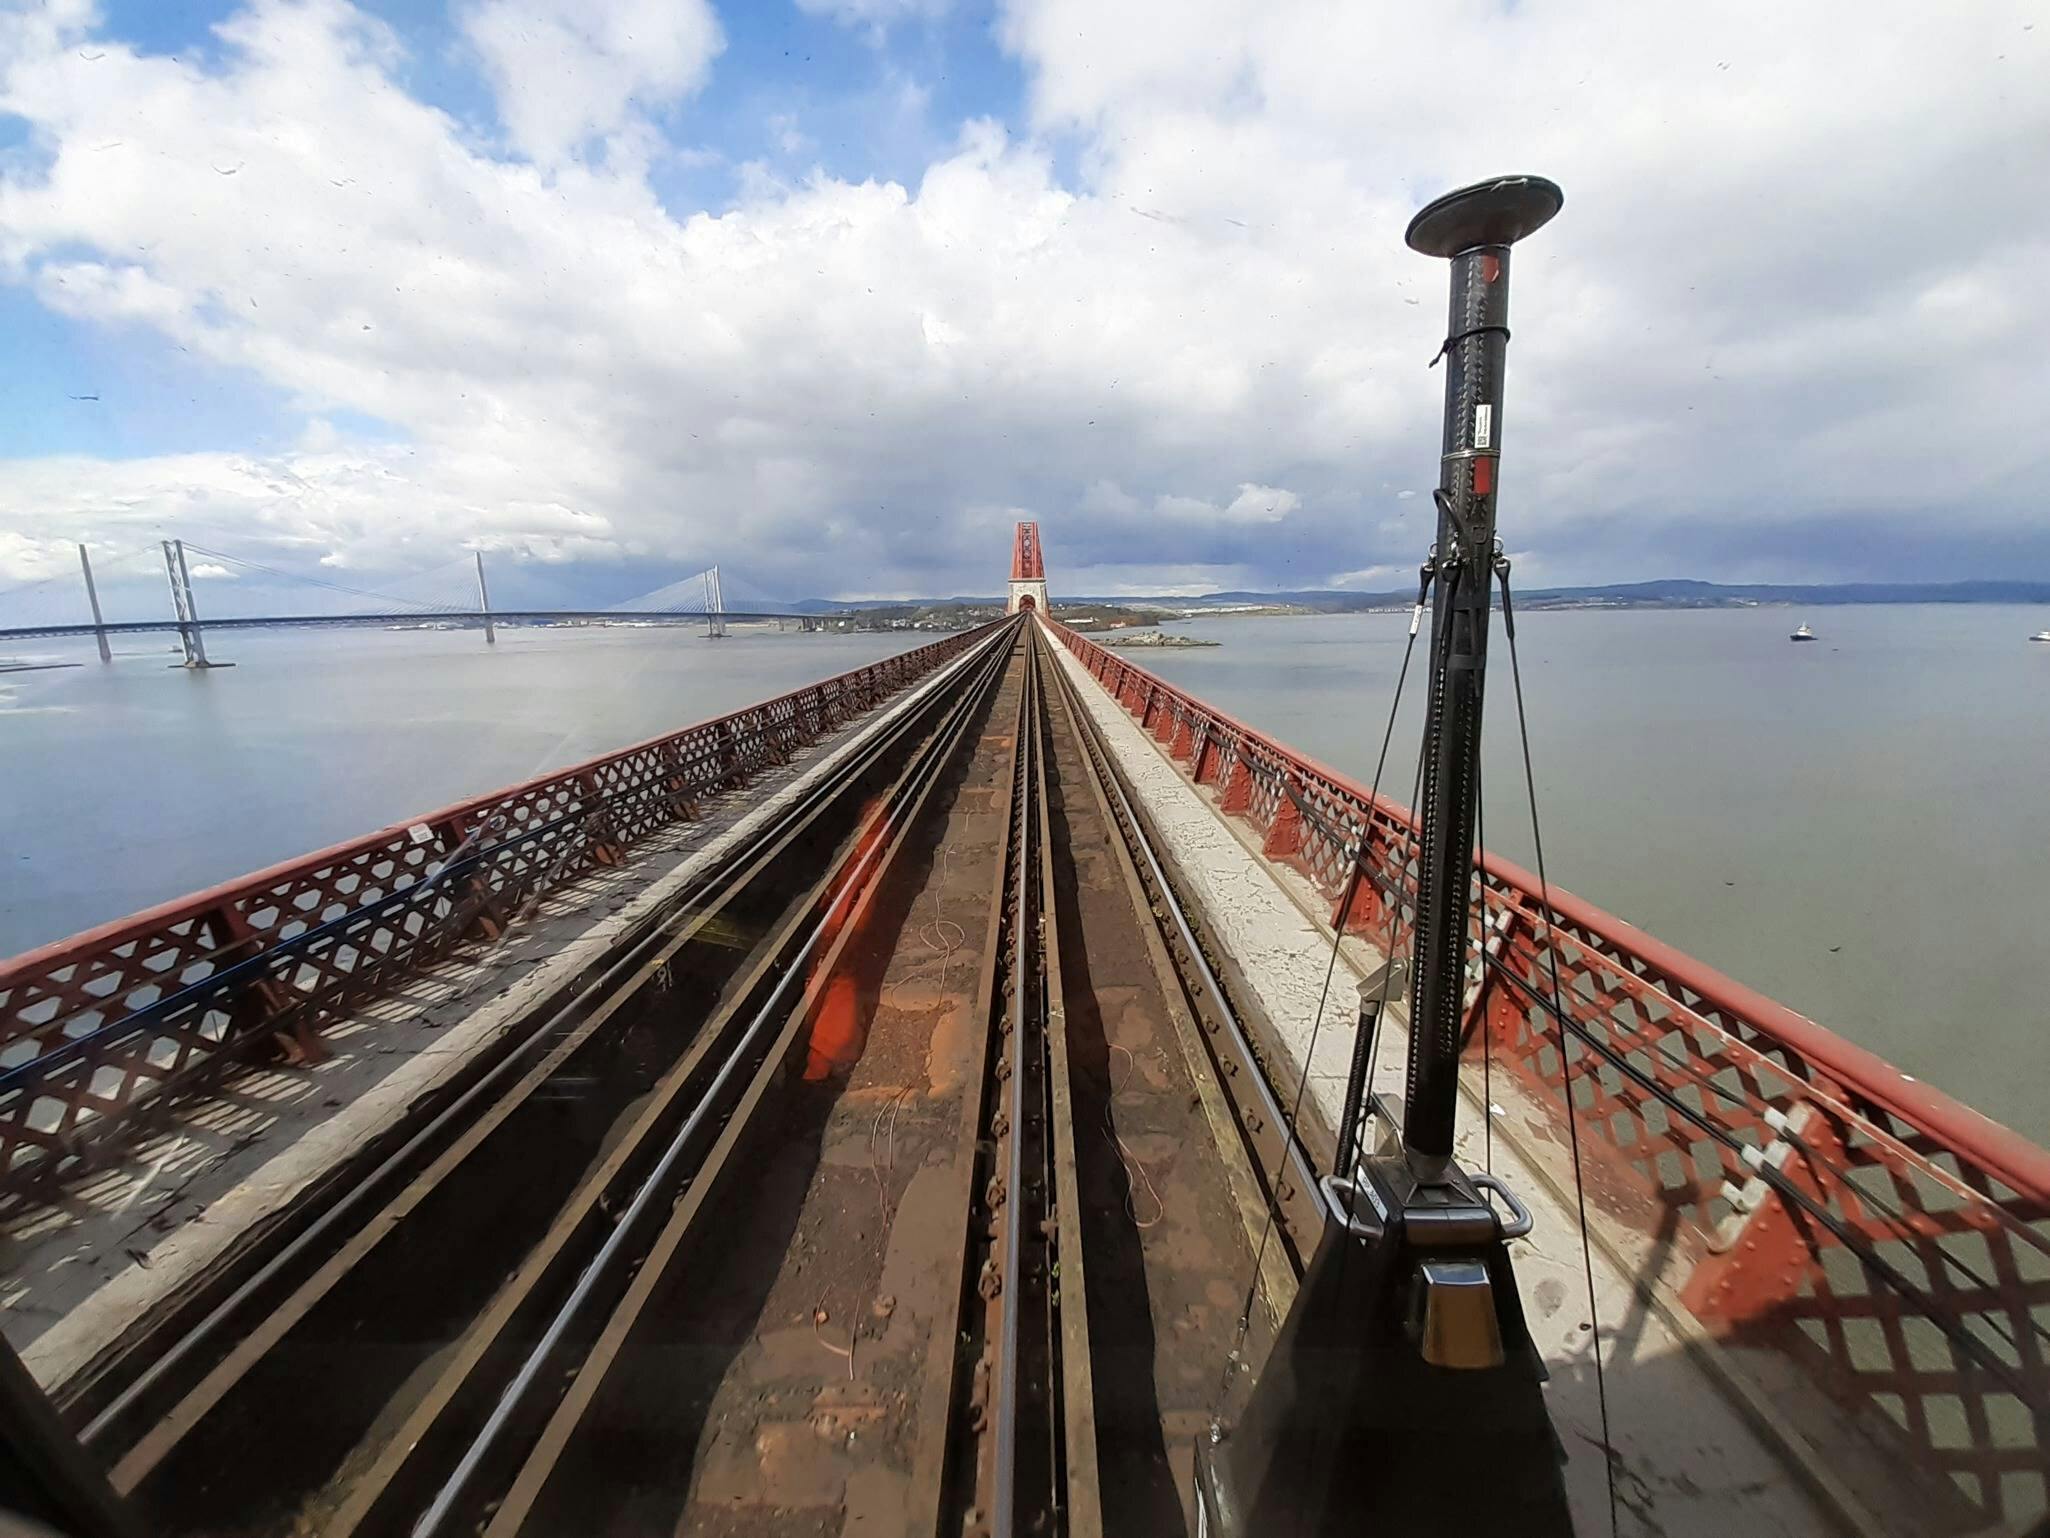 Fugro's RILA� train-mounted survey system is connected to front of the locomotive and is surveying the tracks along the Forth Bridge, Scotland